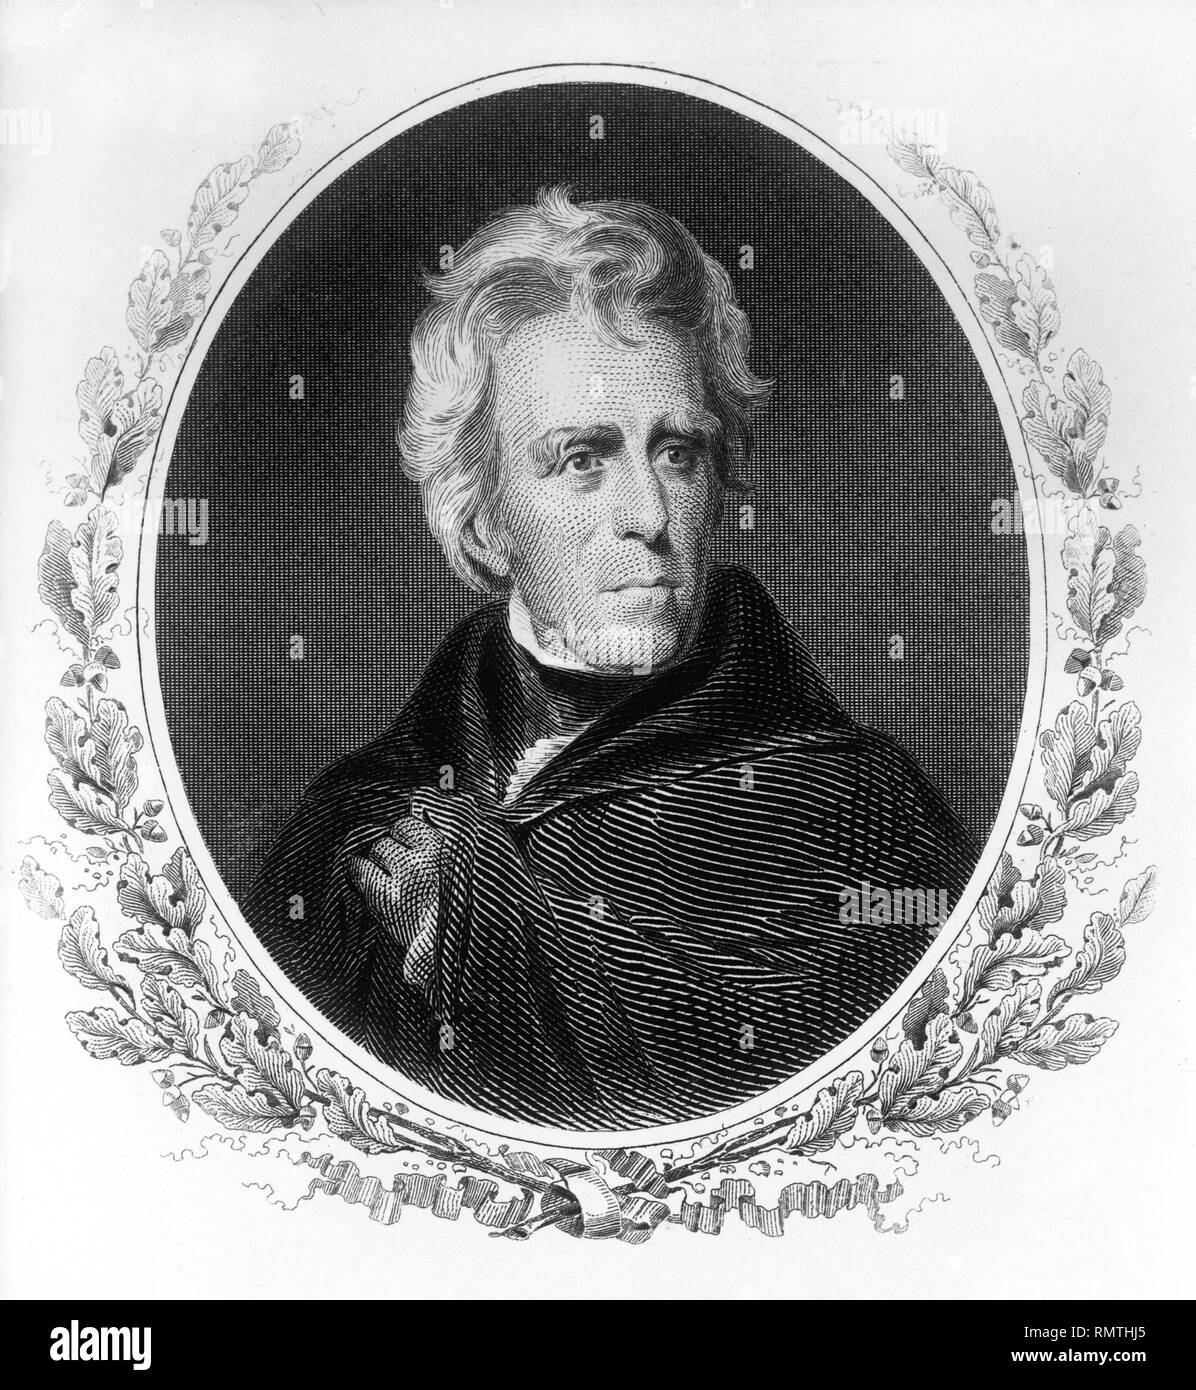 Andrew Jackson (1767-1845), Seventh President of the United States, Harris & Ewing, Engraving, 1910's Stock Photo